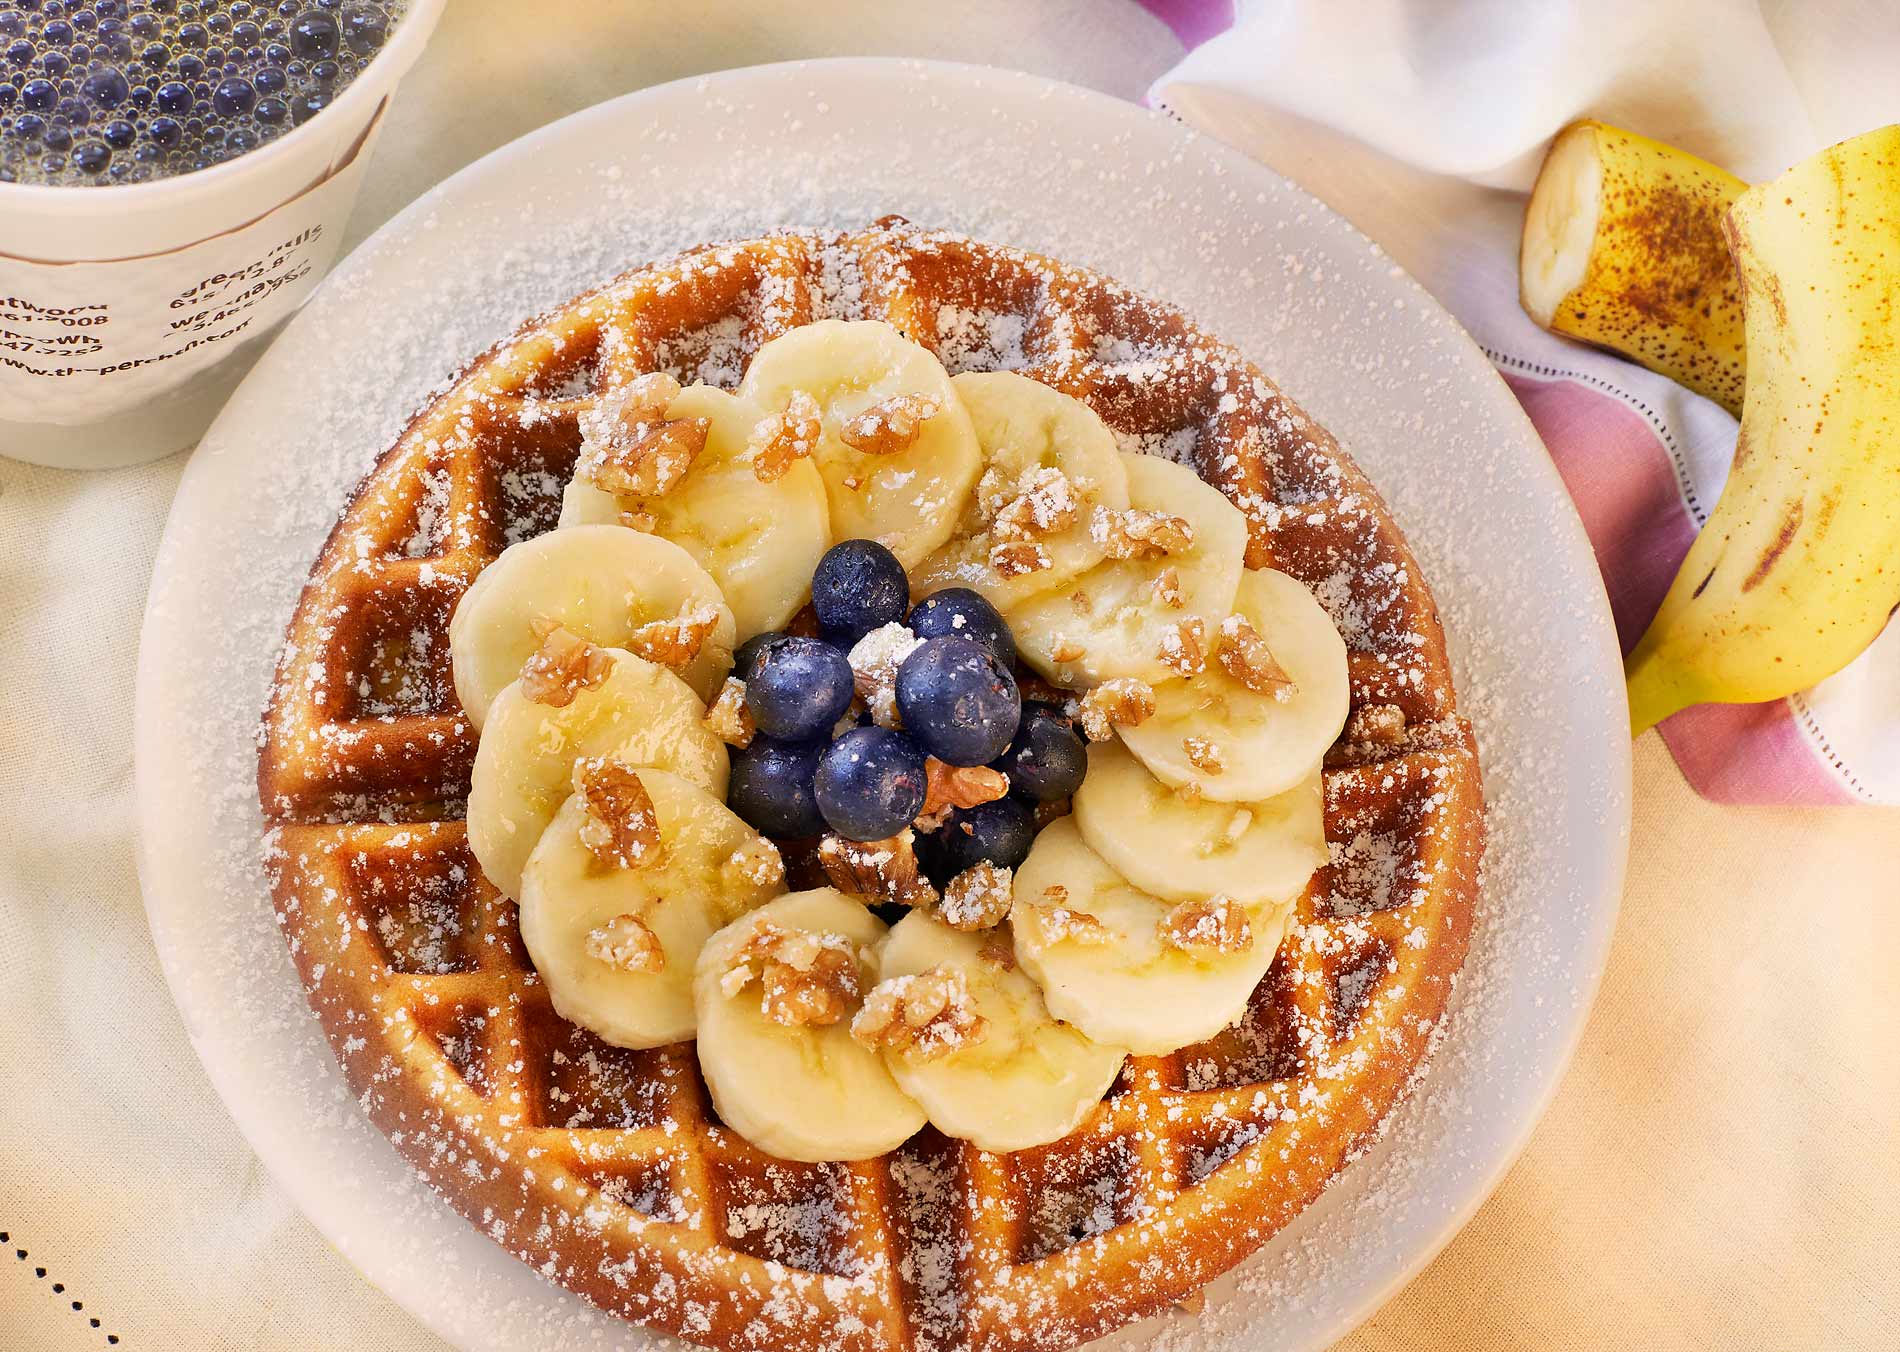  Bannana Blueberry Waffles at The Perch restaurant in Nashville Tennessee